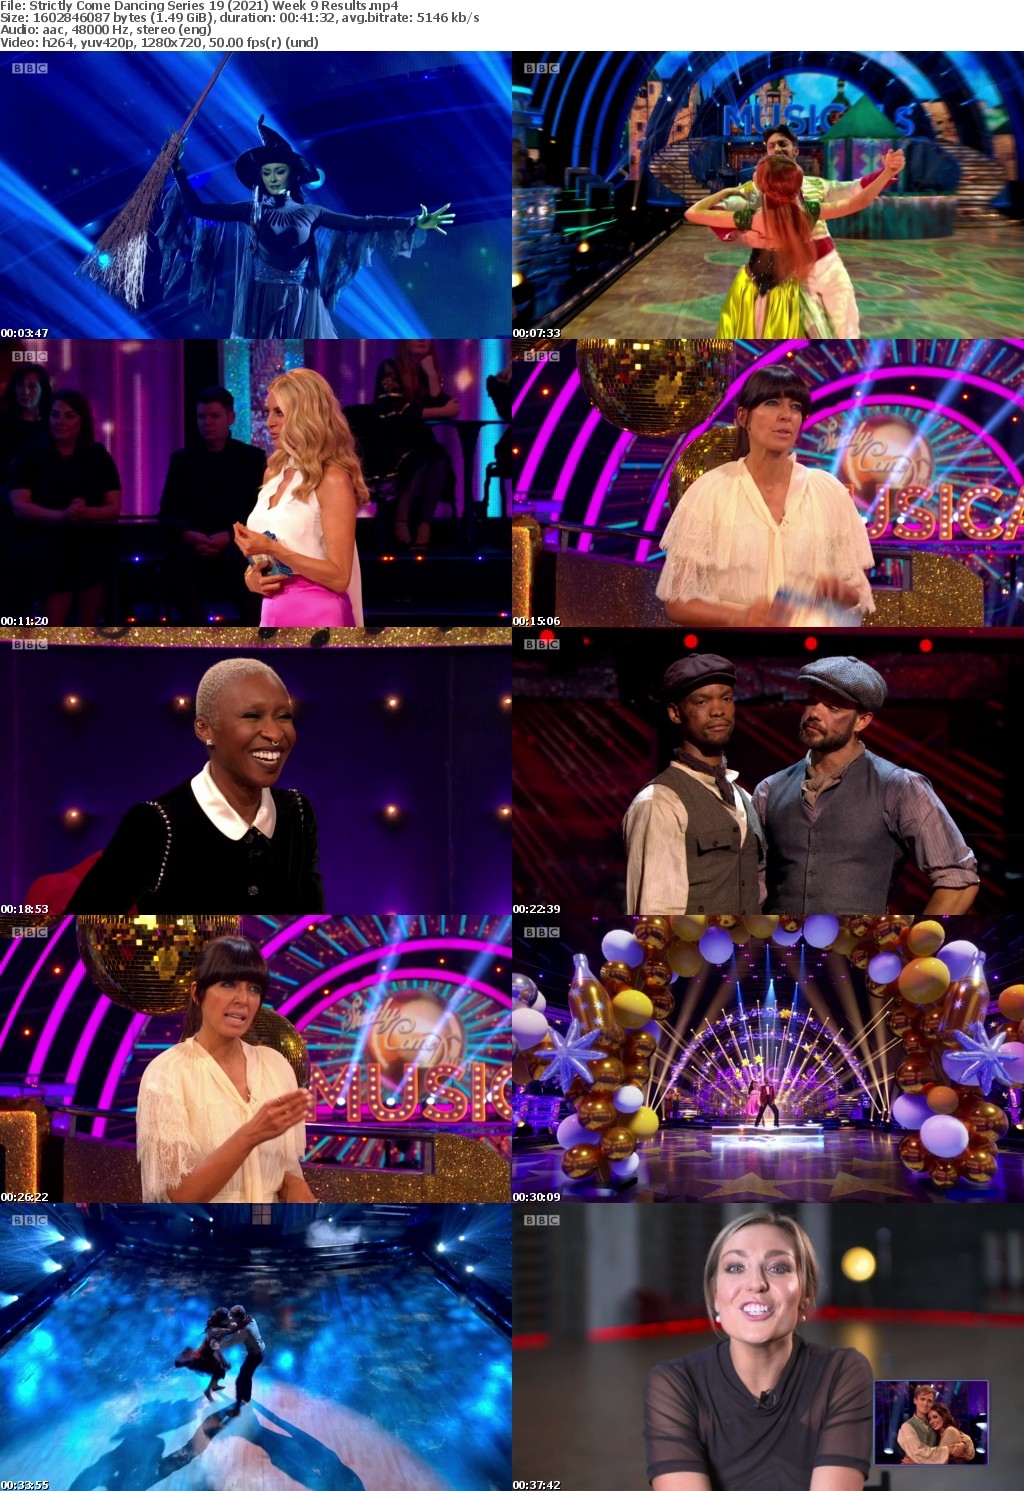 Strictly Come Dancing Series 19 (2021) Week 9 Results (1280x720p HD, 50fps, soft Eng subs)